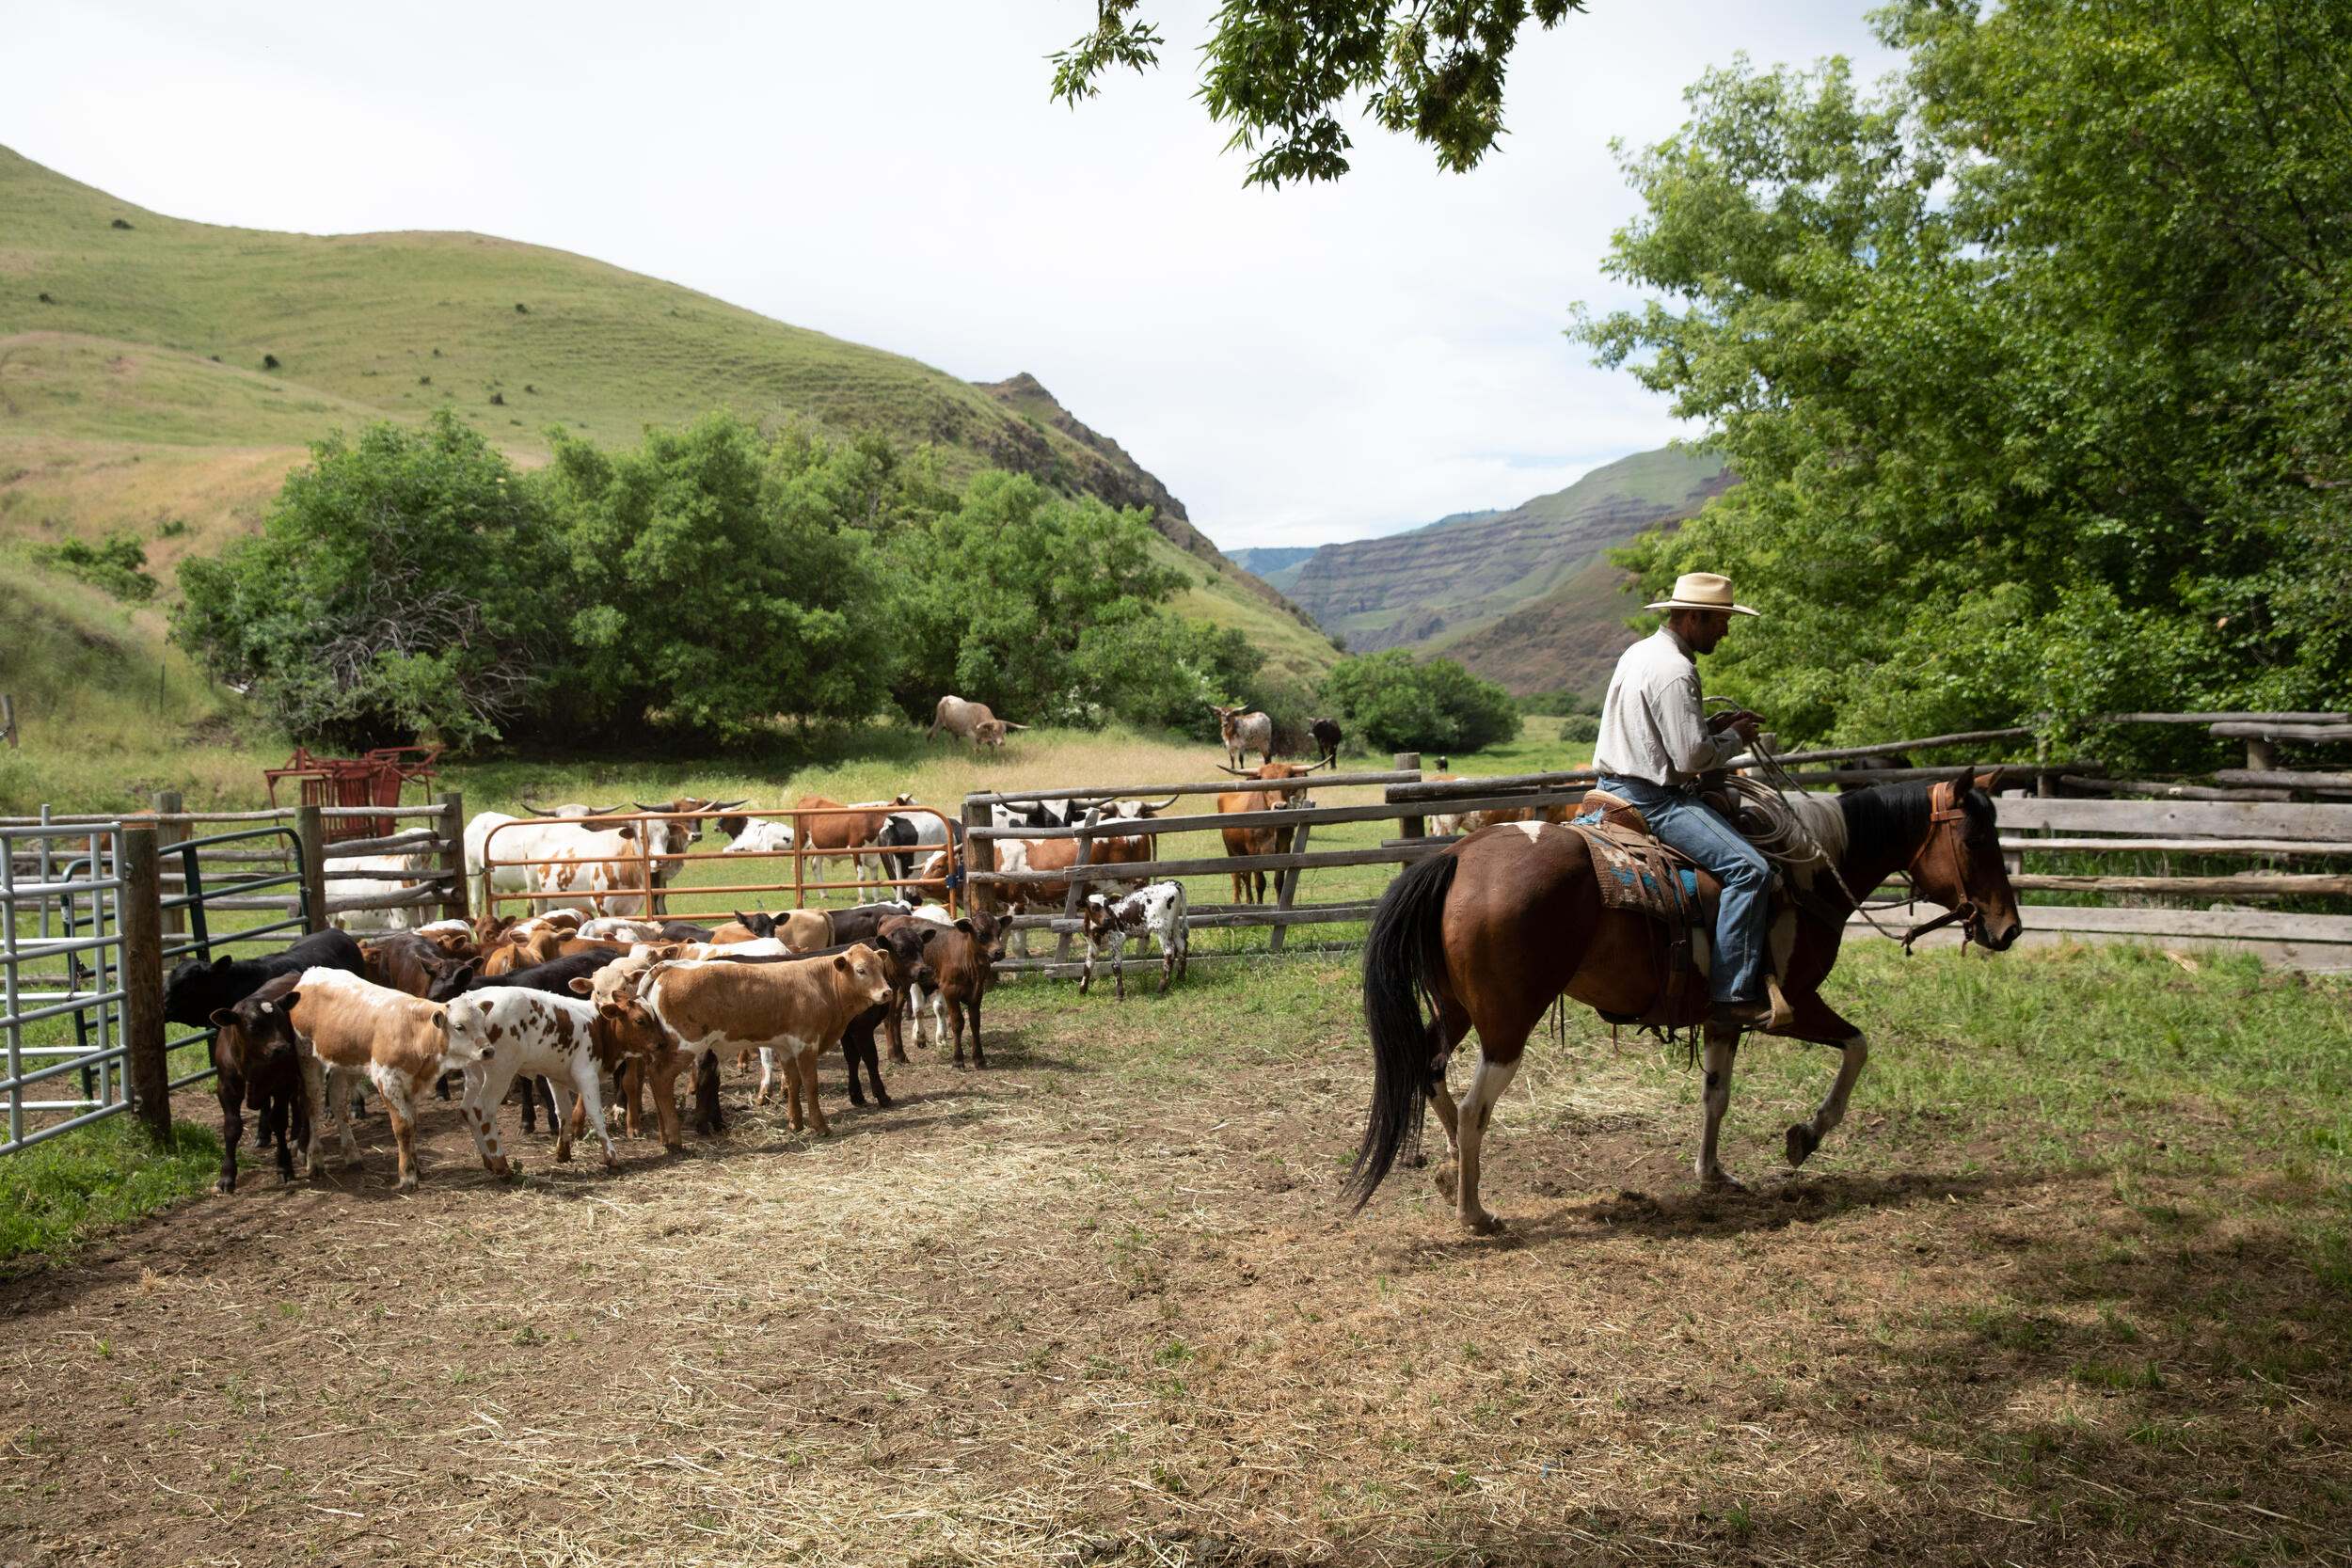 A rancher works on horeseback among his cattle.